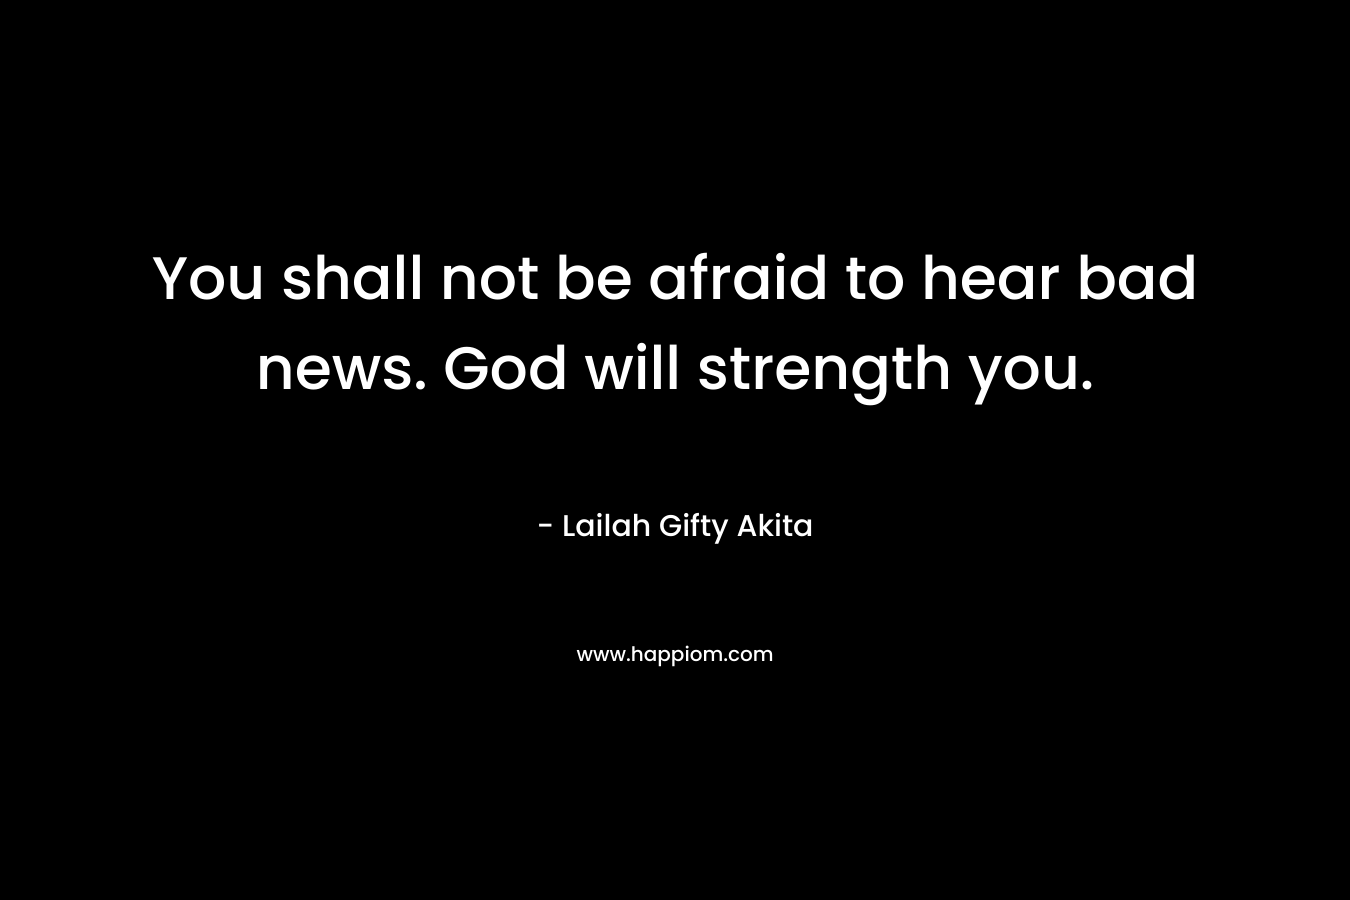 You shall not be afraid to hear bad news. God will strength you.